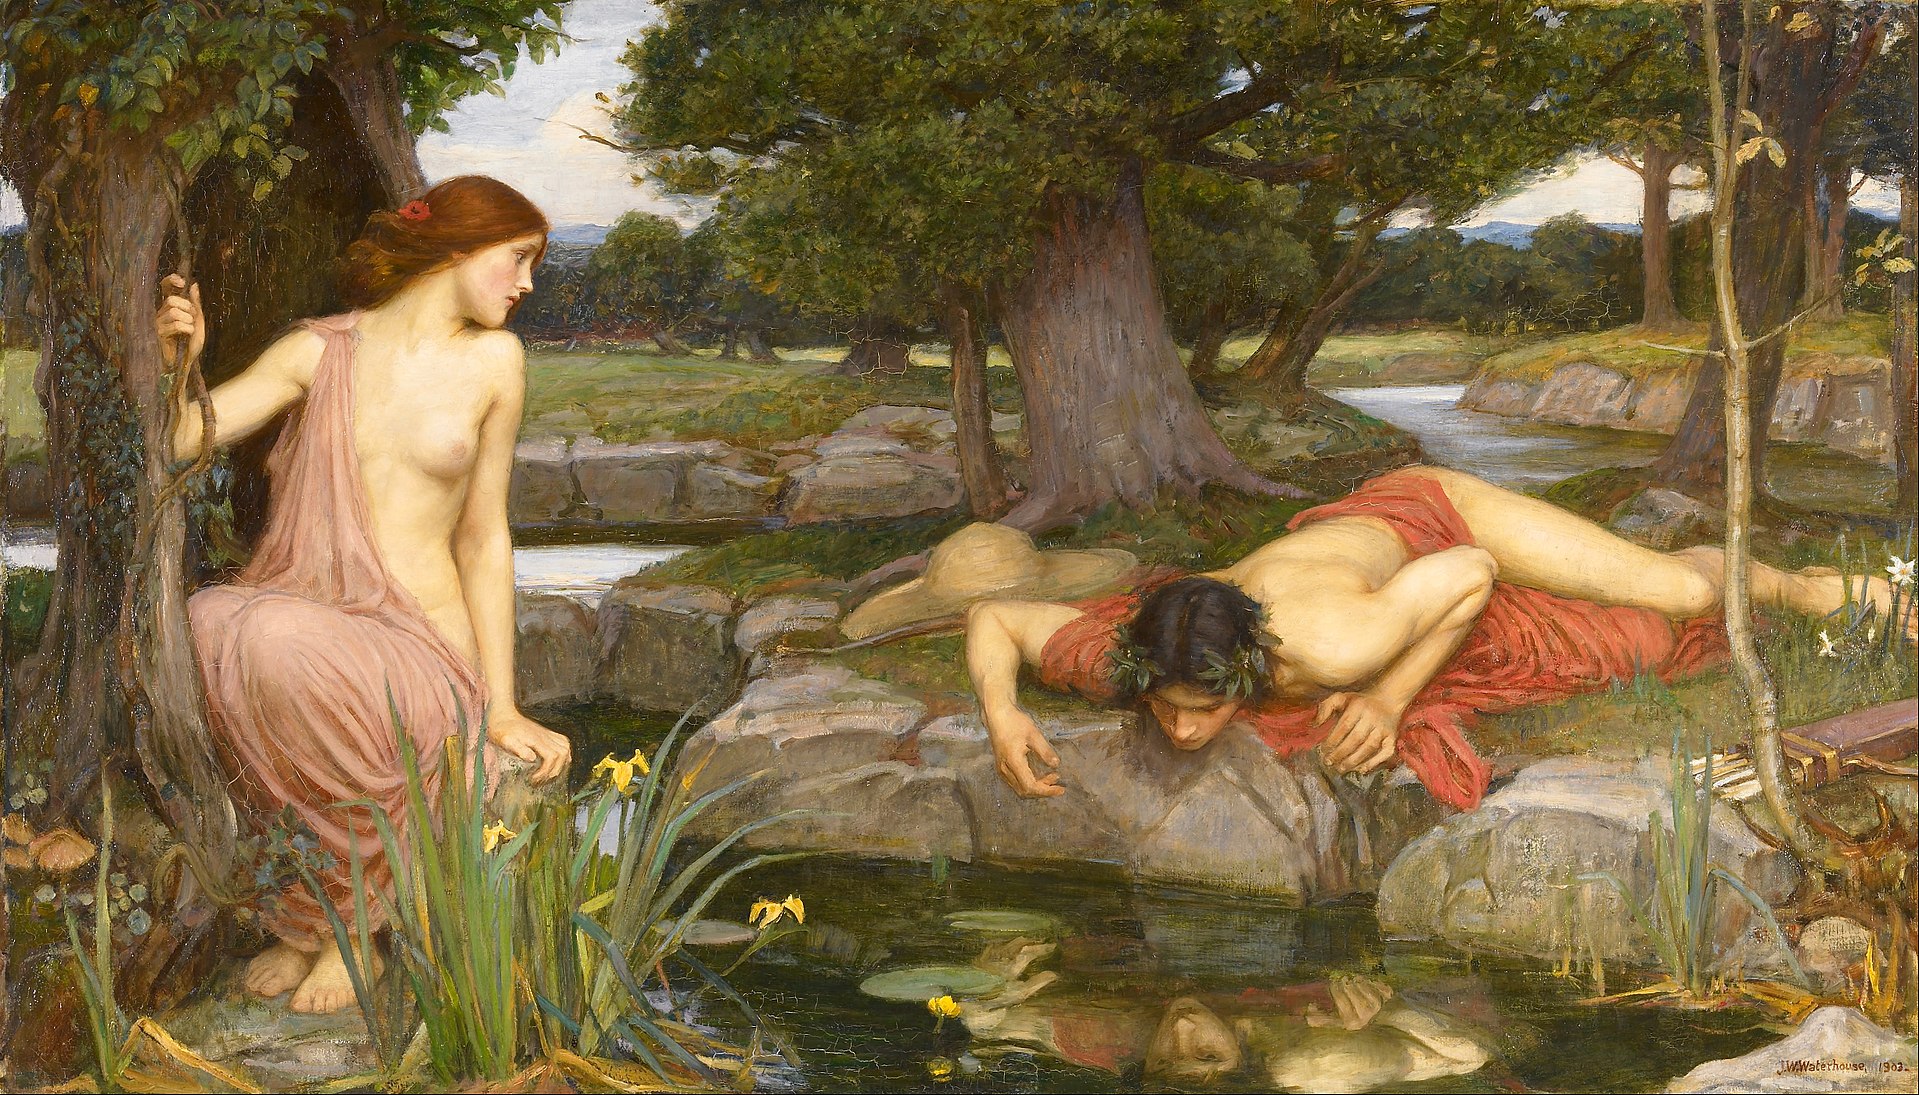 Echo and Narcissus, by John William Waterhouse (1903)